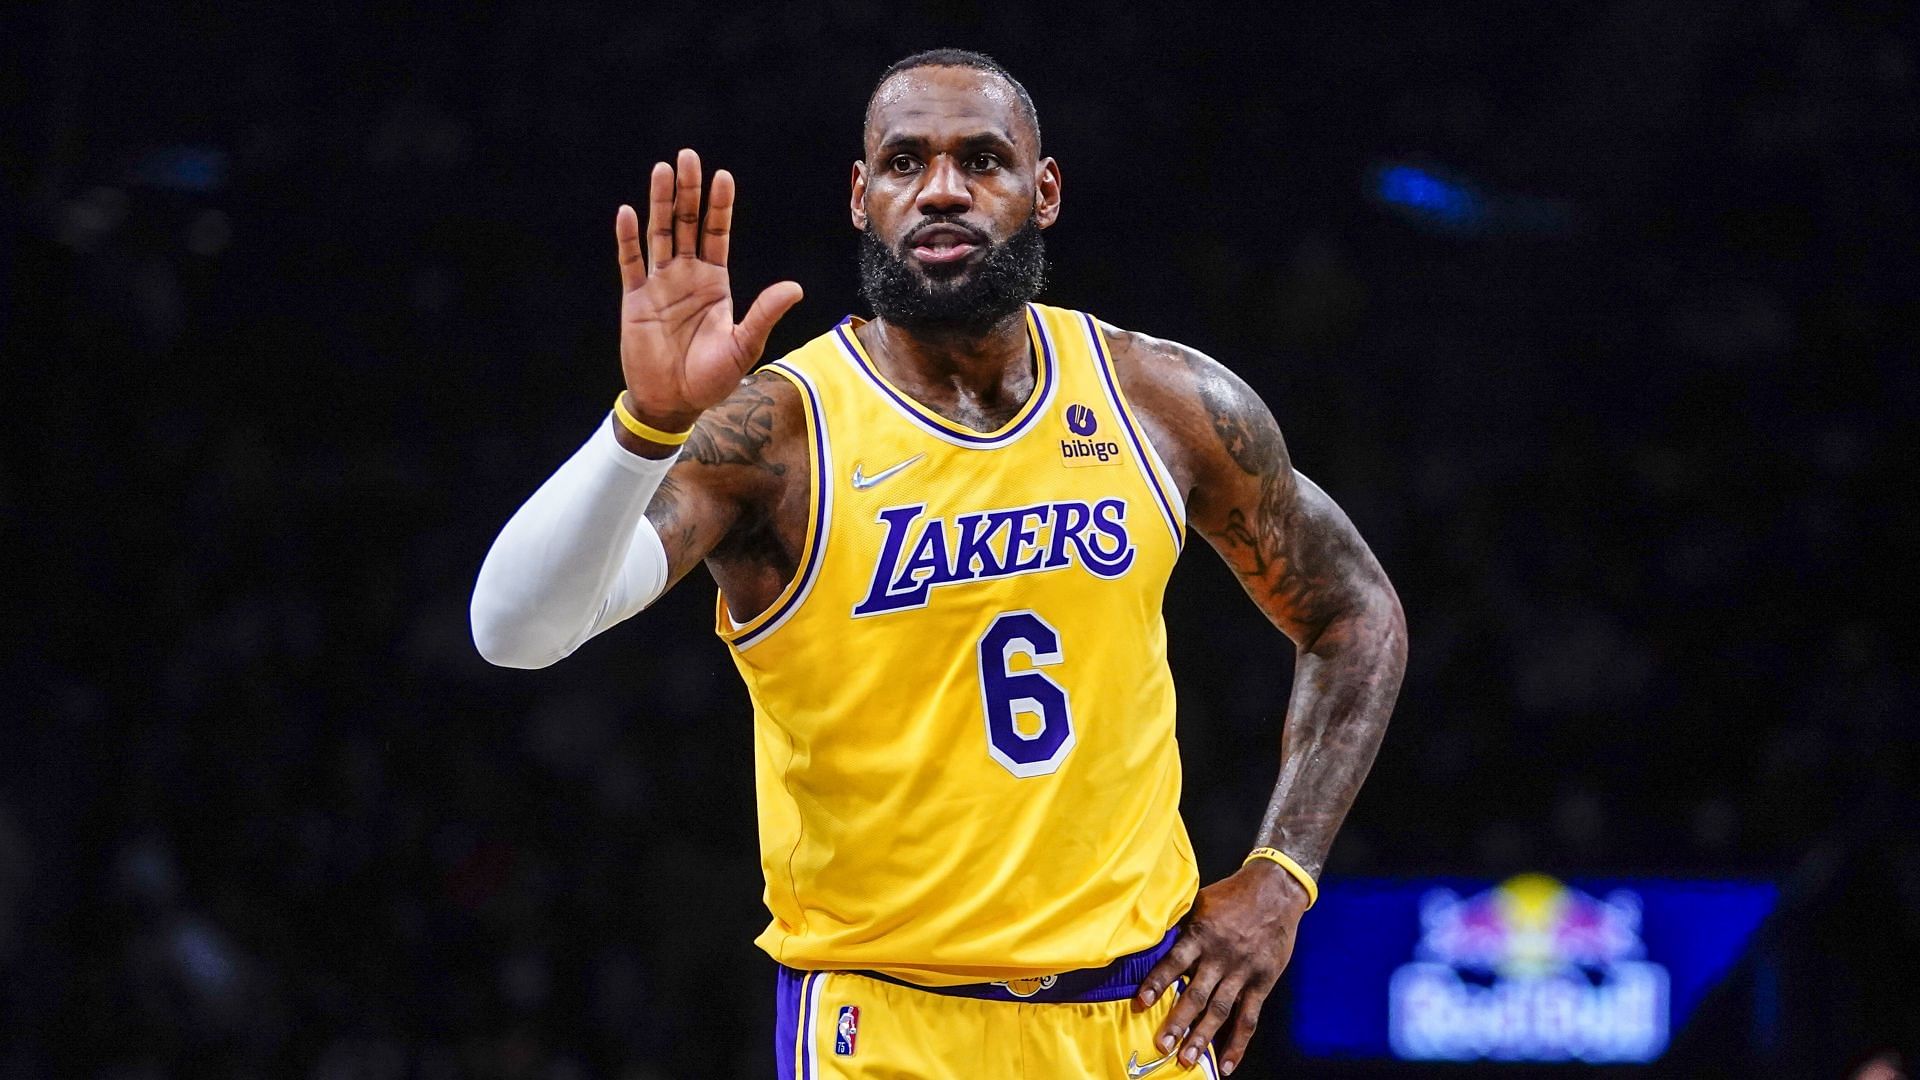 LeBron James is on his way to an inevitable march to surpass Kareem Abdul-Jabbar for the all-time scoring list crown. [Photo: Bleacher Report]